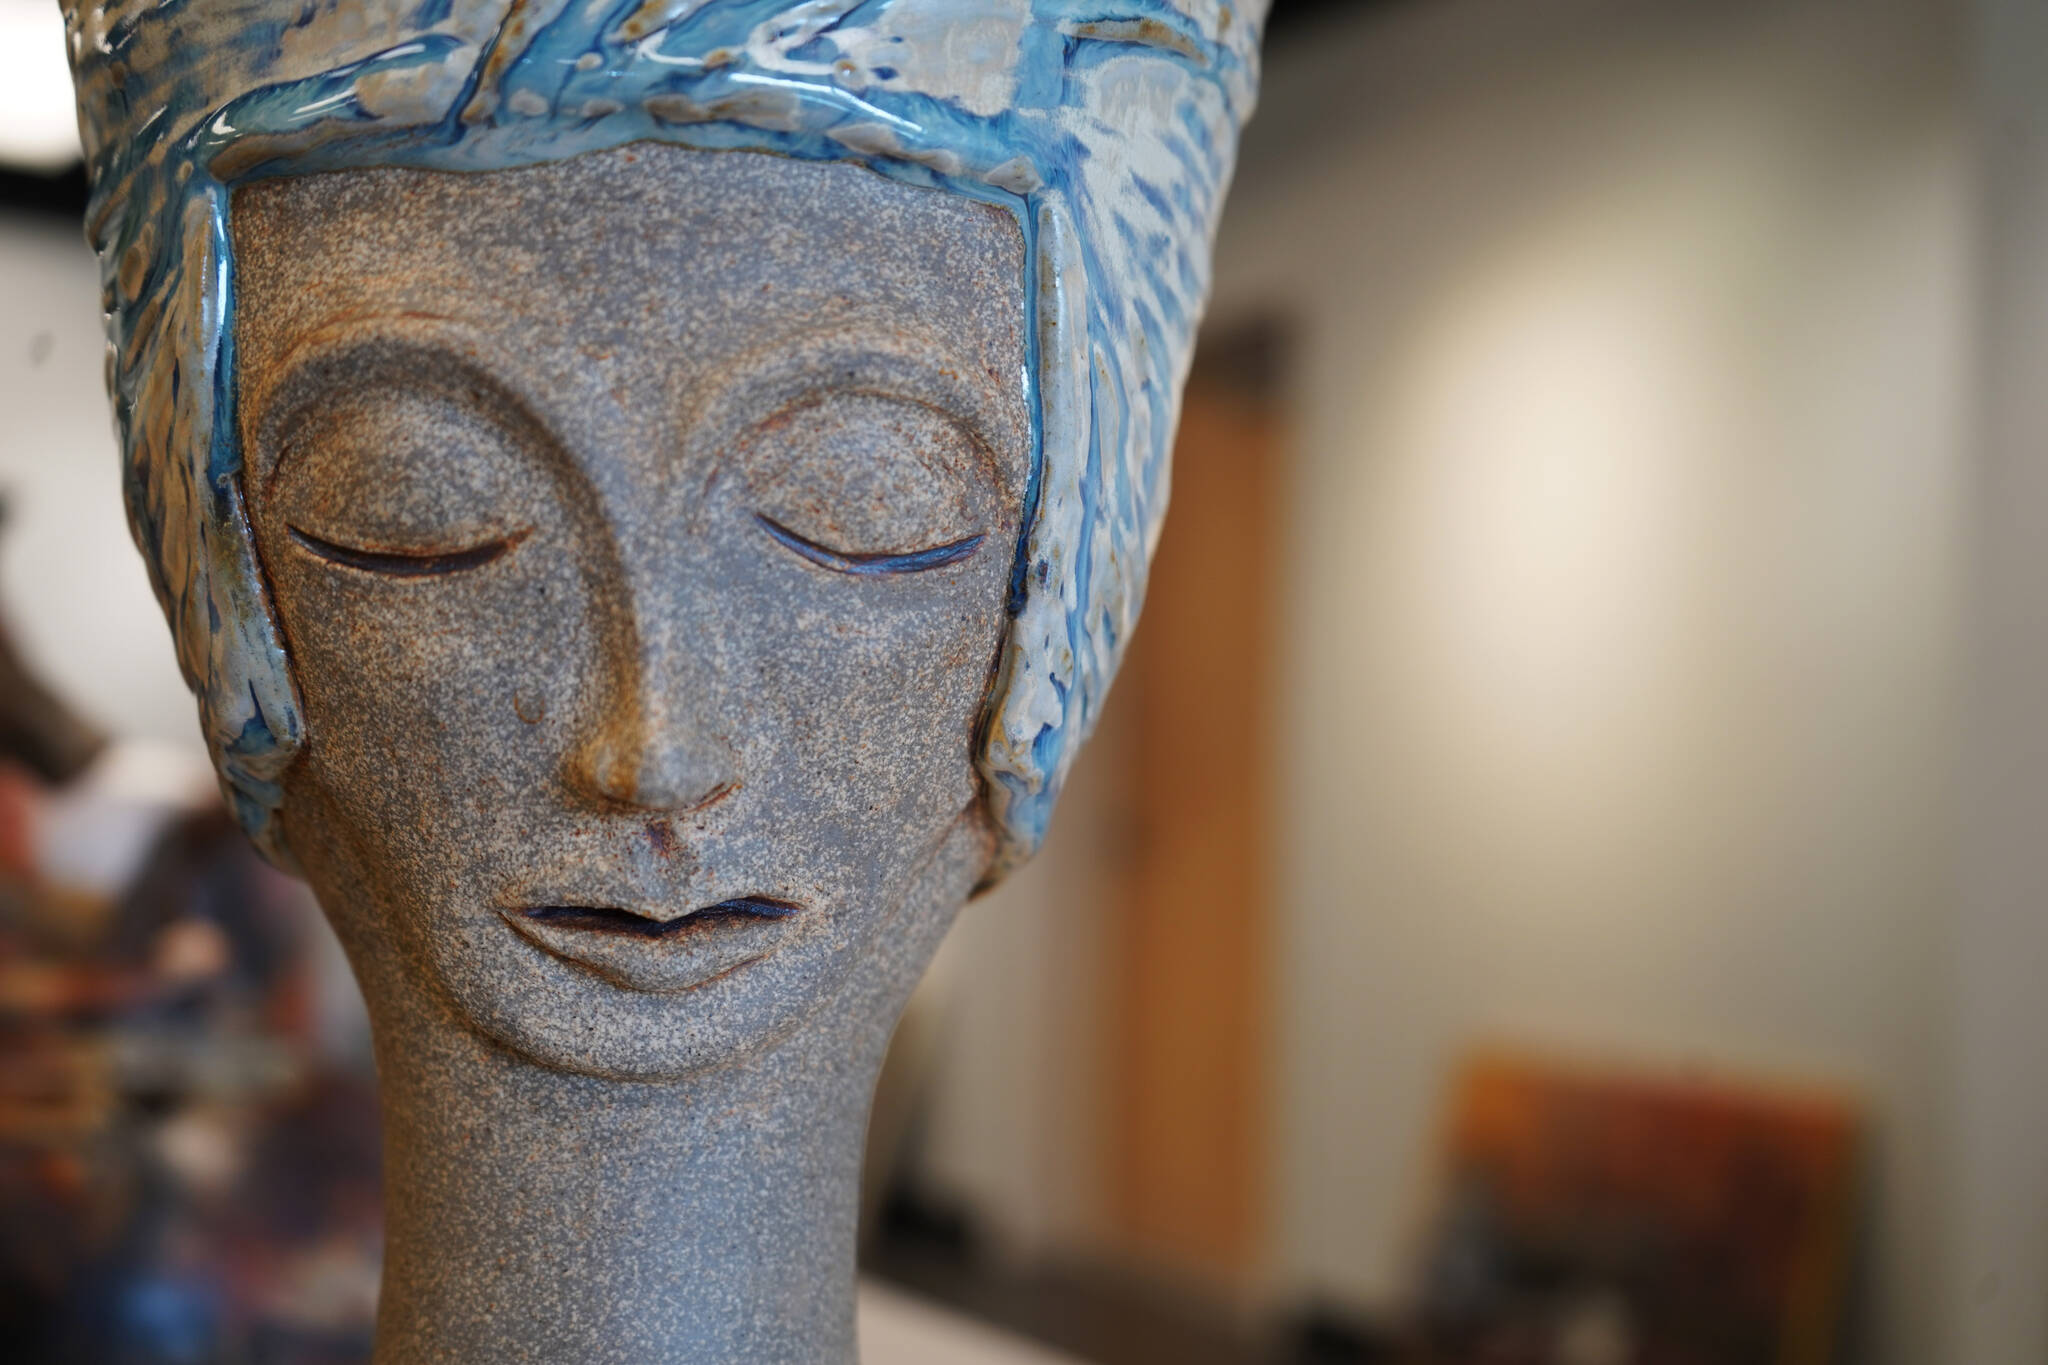 A sculpture by Shannon Olds waits to be placed as part of “Making Her Mark,” the June show at the Kenai Art Center in Kenai, Alaska, on Tuesday, May 30, 2023. (Jake Dye/Peninsula Clarion)